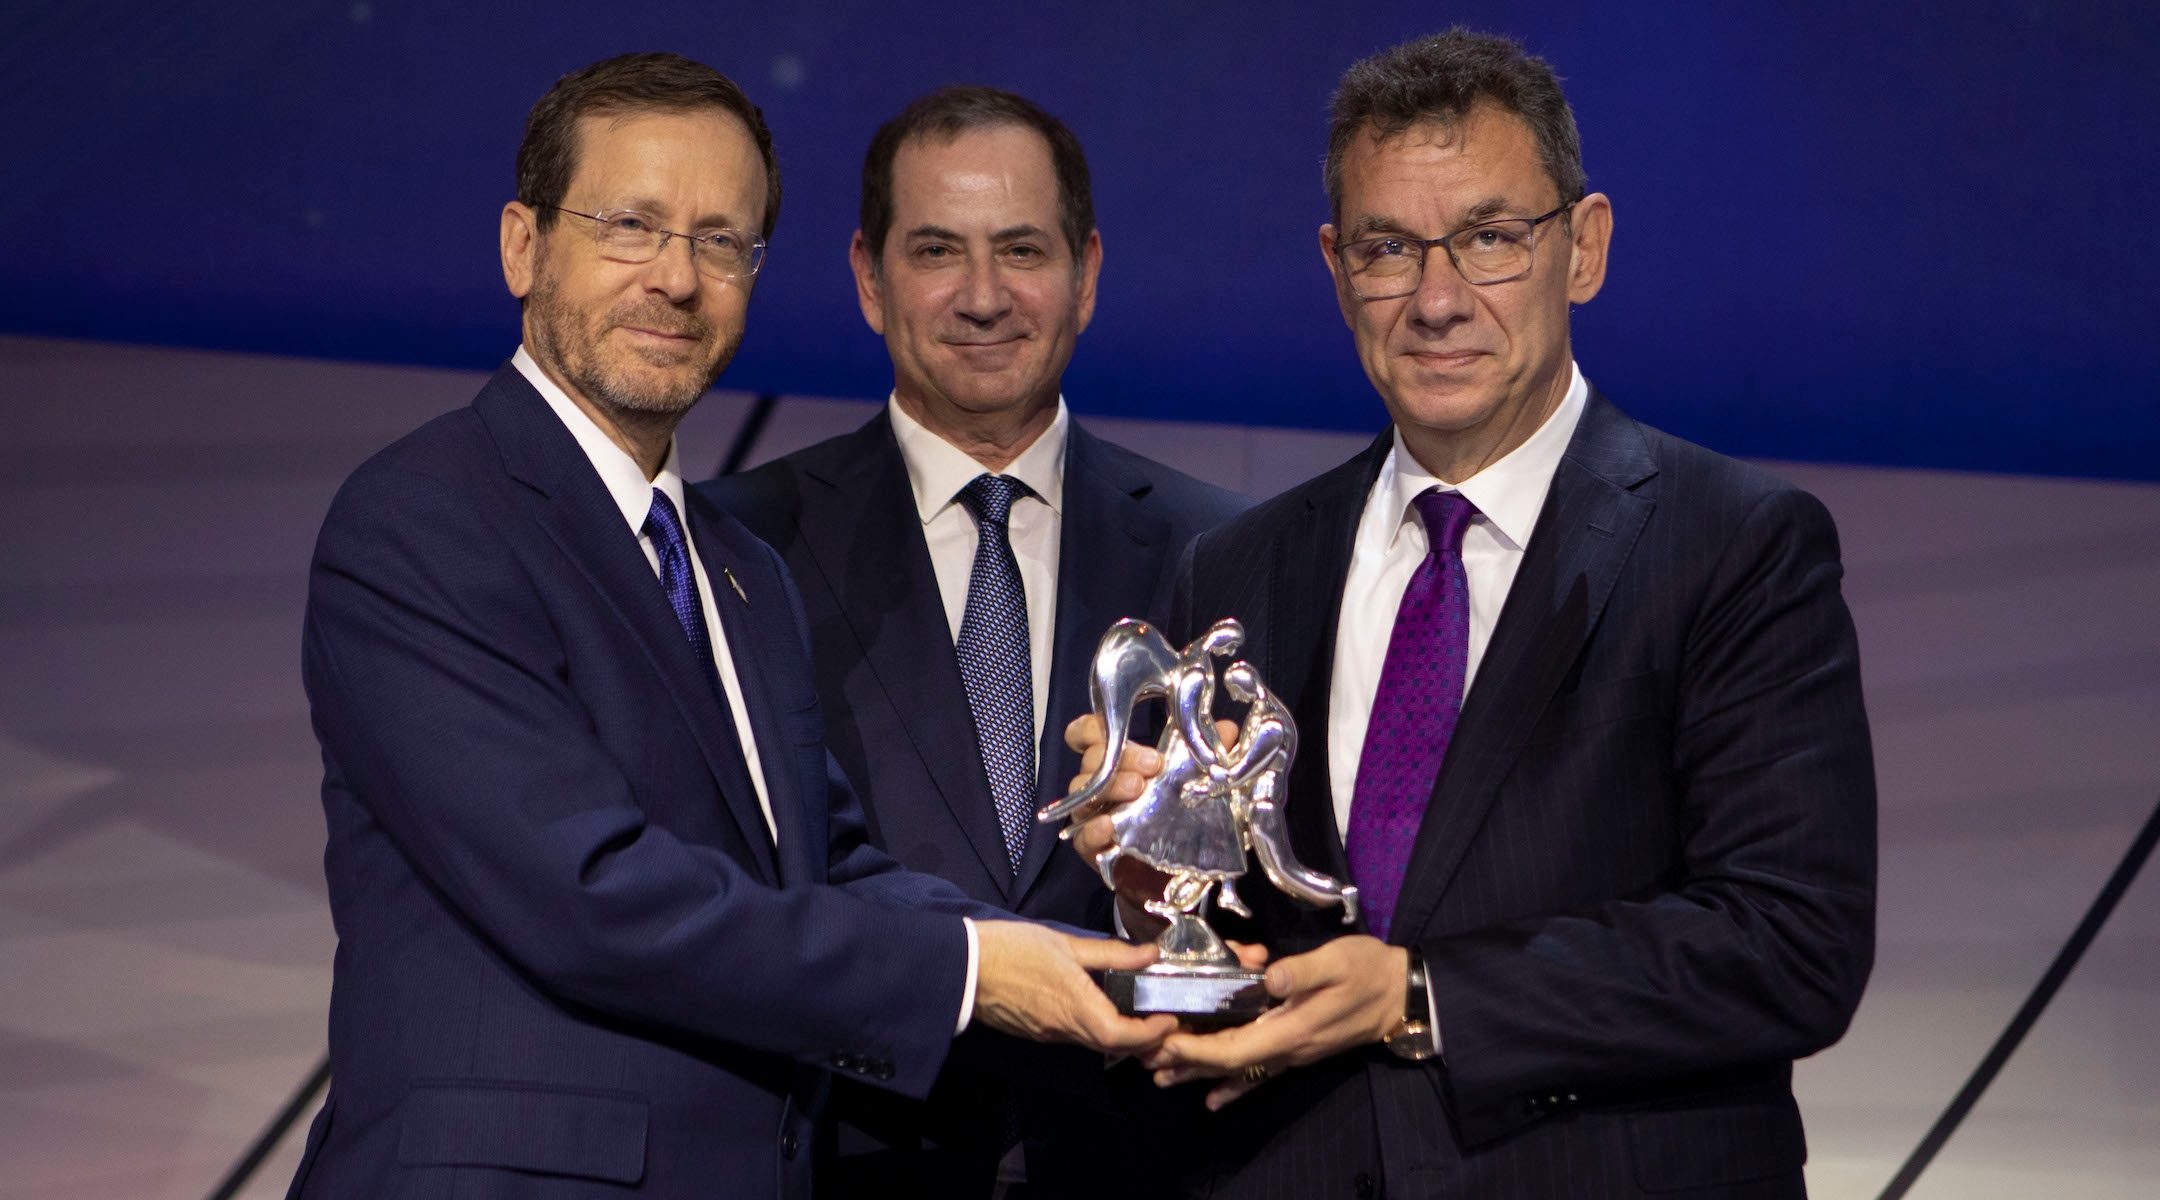 Stan Polovets, center, with Israeli President Isaac Herzog, left, presenting the 2022 Genesis Prize to Pfizer Chairman and CEO Albert Bourla, right, one stage at award ceremony.